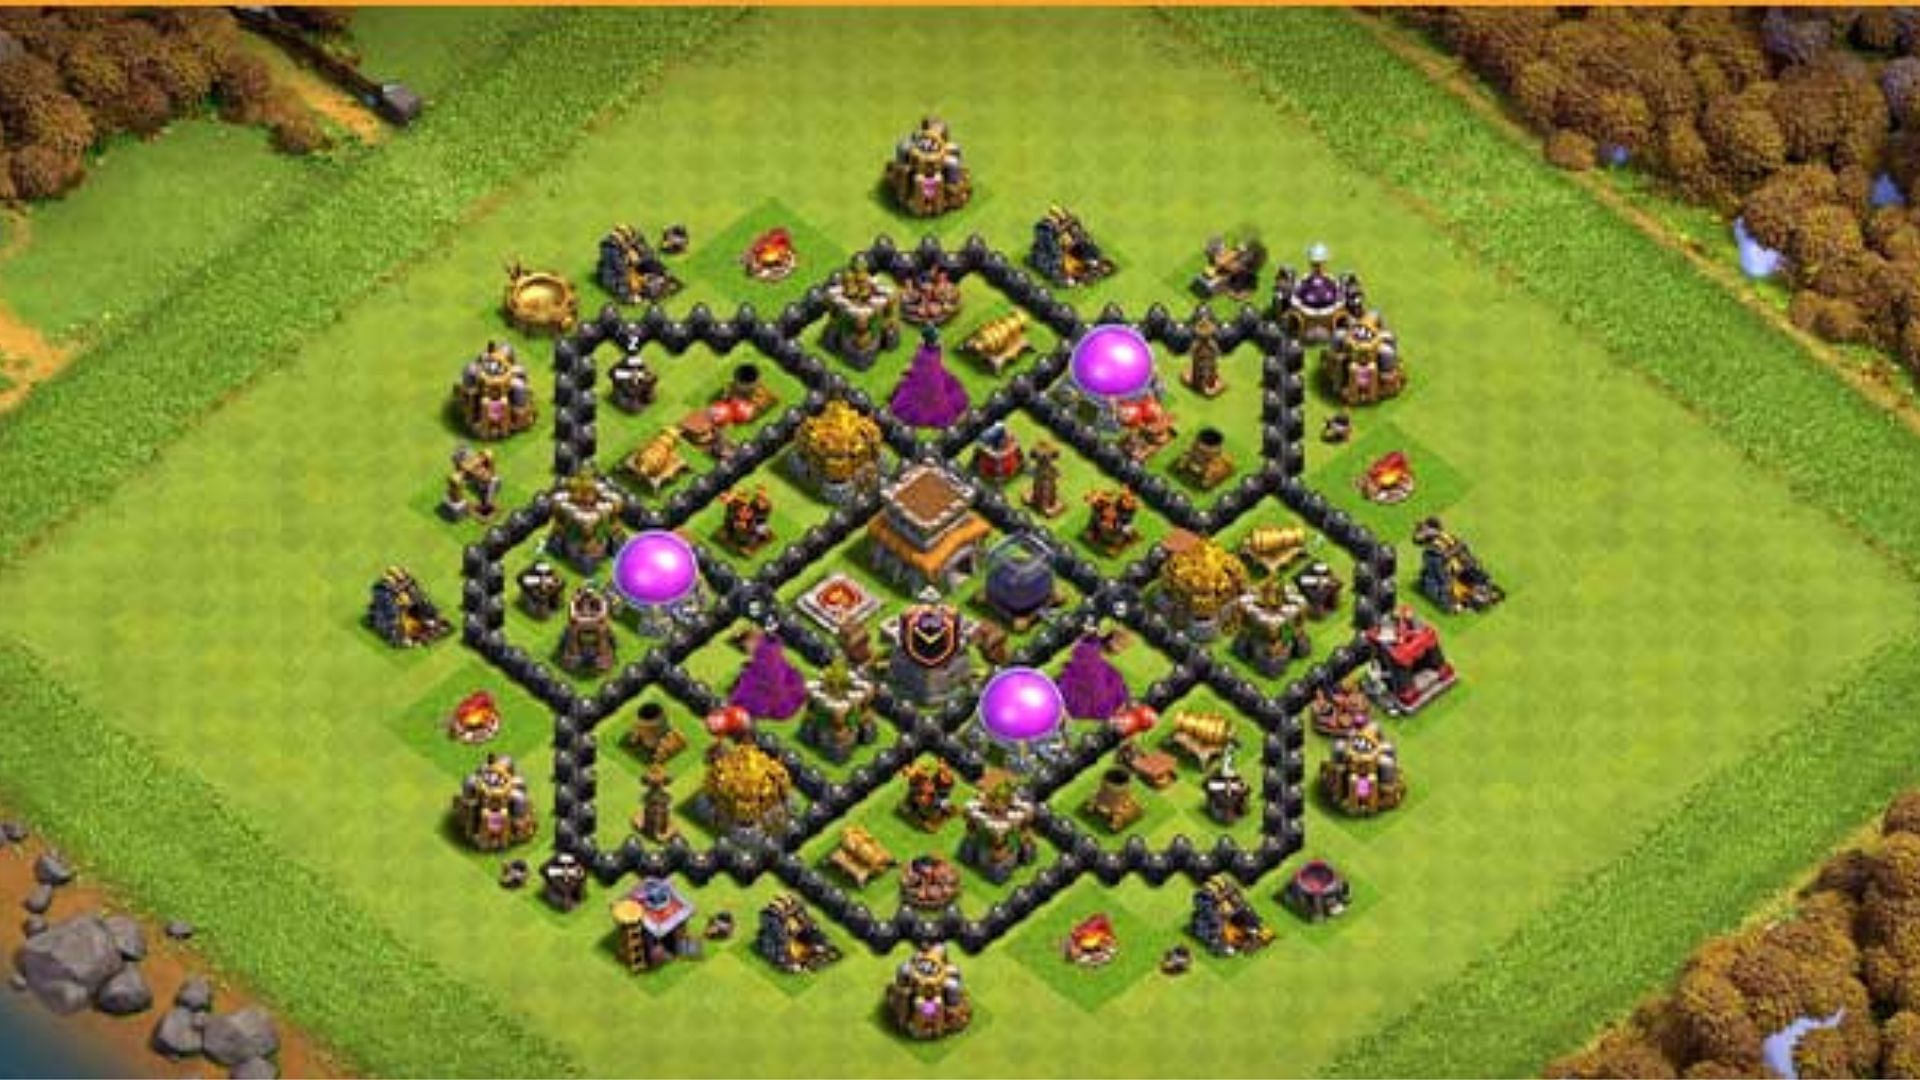 Blade Ring bases in Clash of Clans (Image via SuperCell)